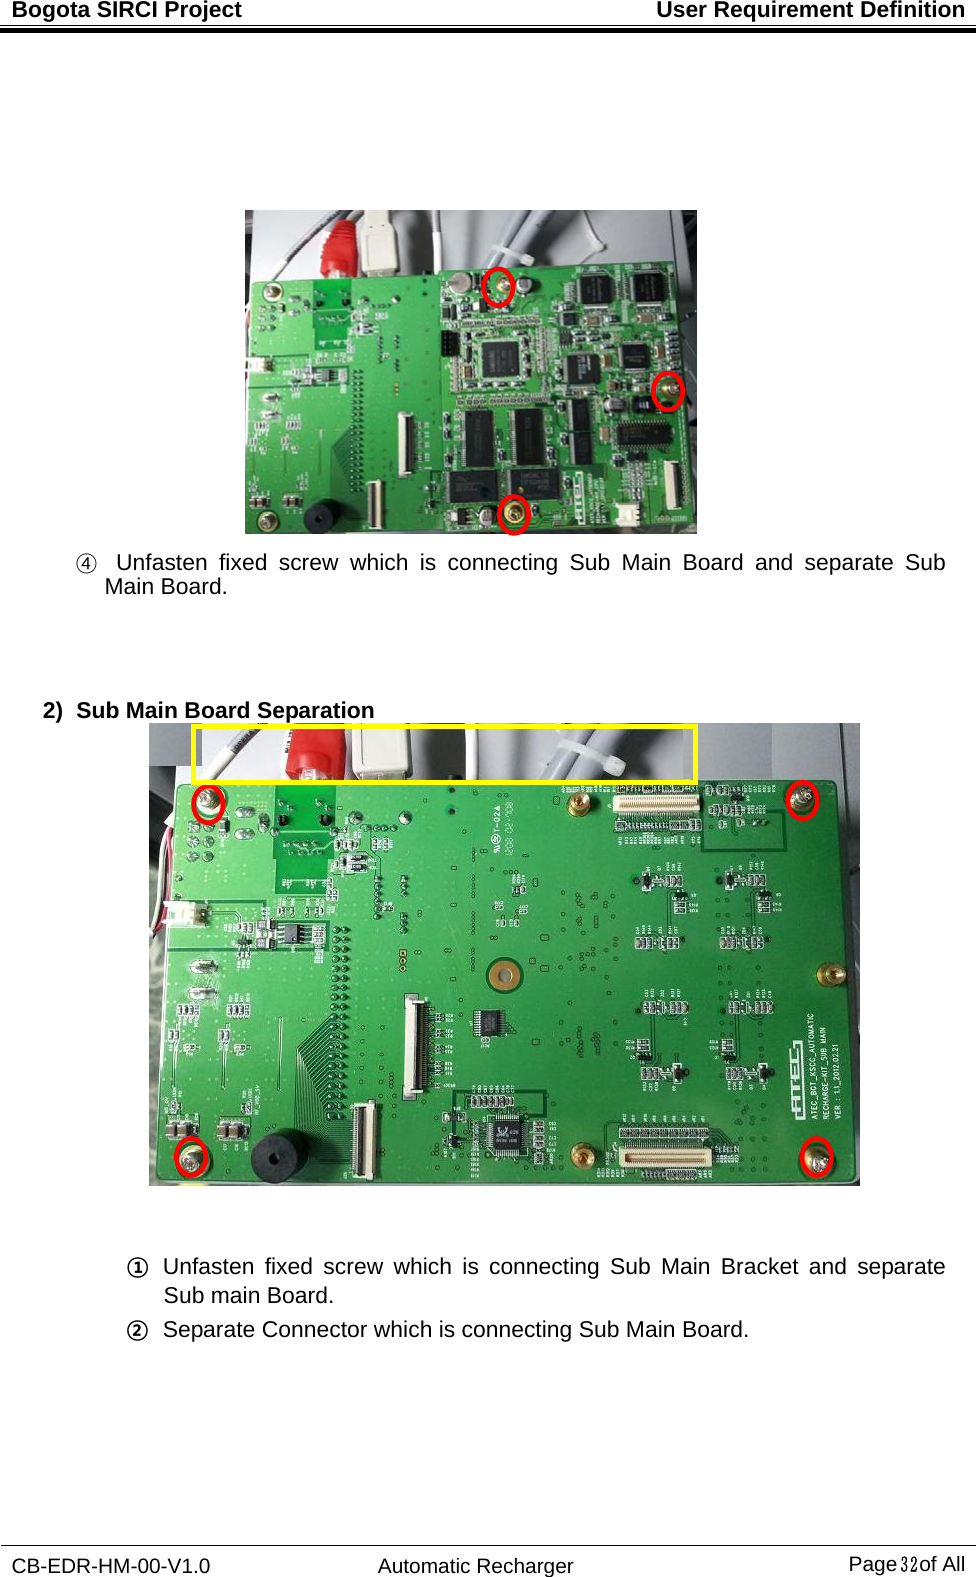 Bogota SIRCI Project  User Requirement Definition CB-EDR-HM-00-V1.0 Automatic Recharger Page３２ of All                     ④  Unfasten fixed screw which is connecting Sub Main Board and separate Sub Main Board.       2)  Sub Main Board Separation    ①  Unfasten fixed screw which is connecting Sub Main Bracket and separate Sub main Board.   ②   Separate Connector which is connecting Sub Main Board. 